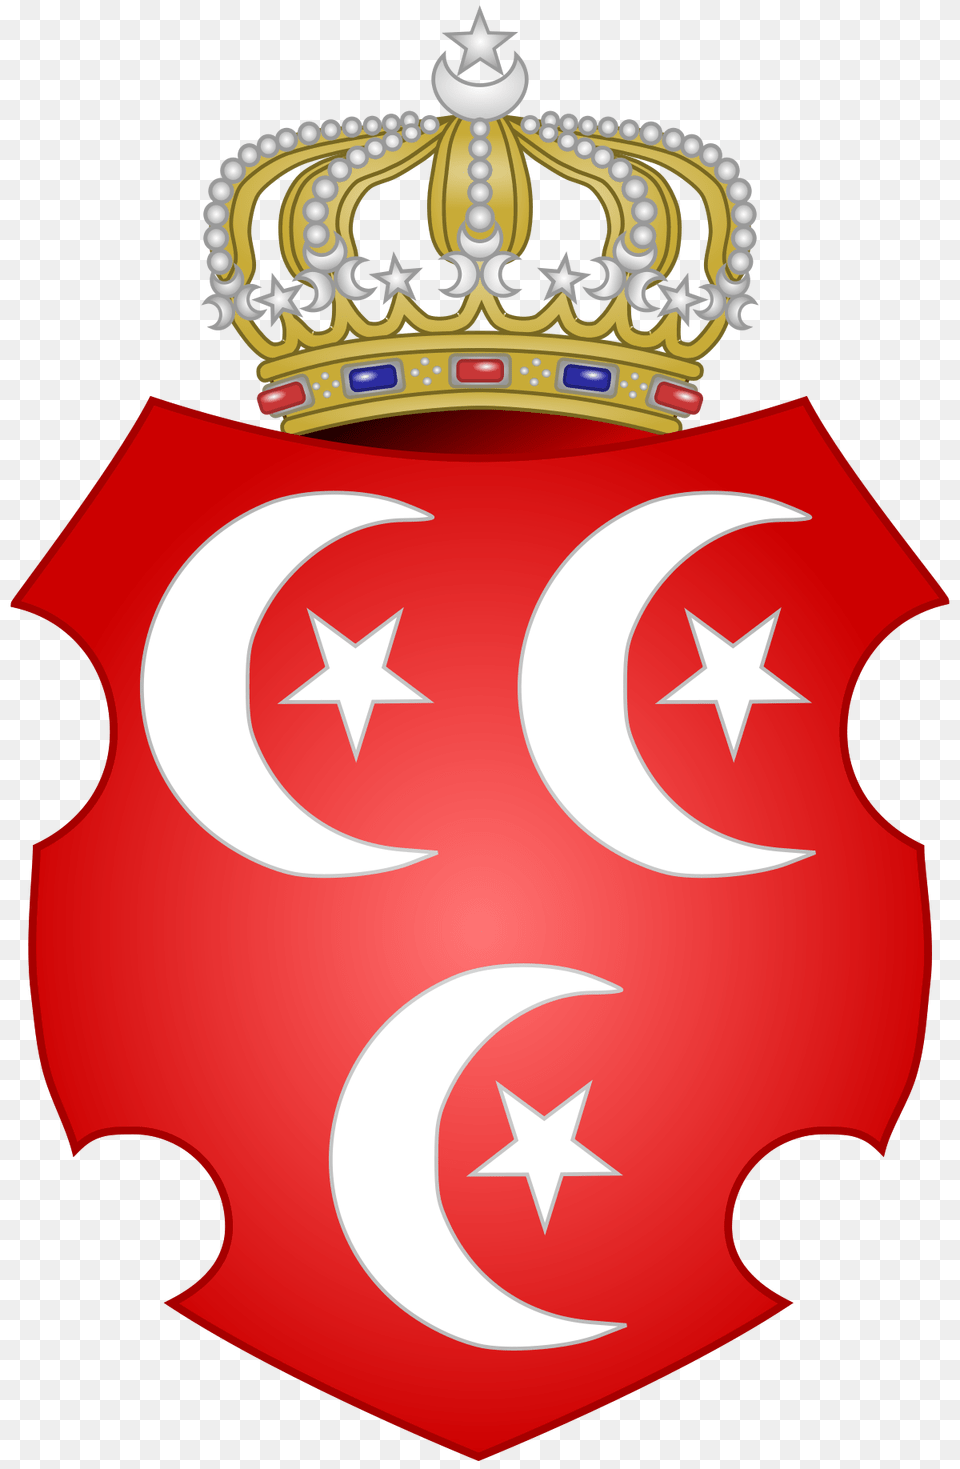 List Of Monarchs Of The Muhammad Ali Dynasty, First Aid, Symbol, Logo, Accessories Png Image